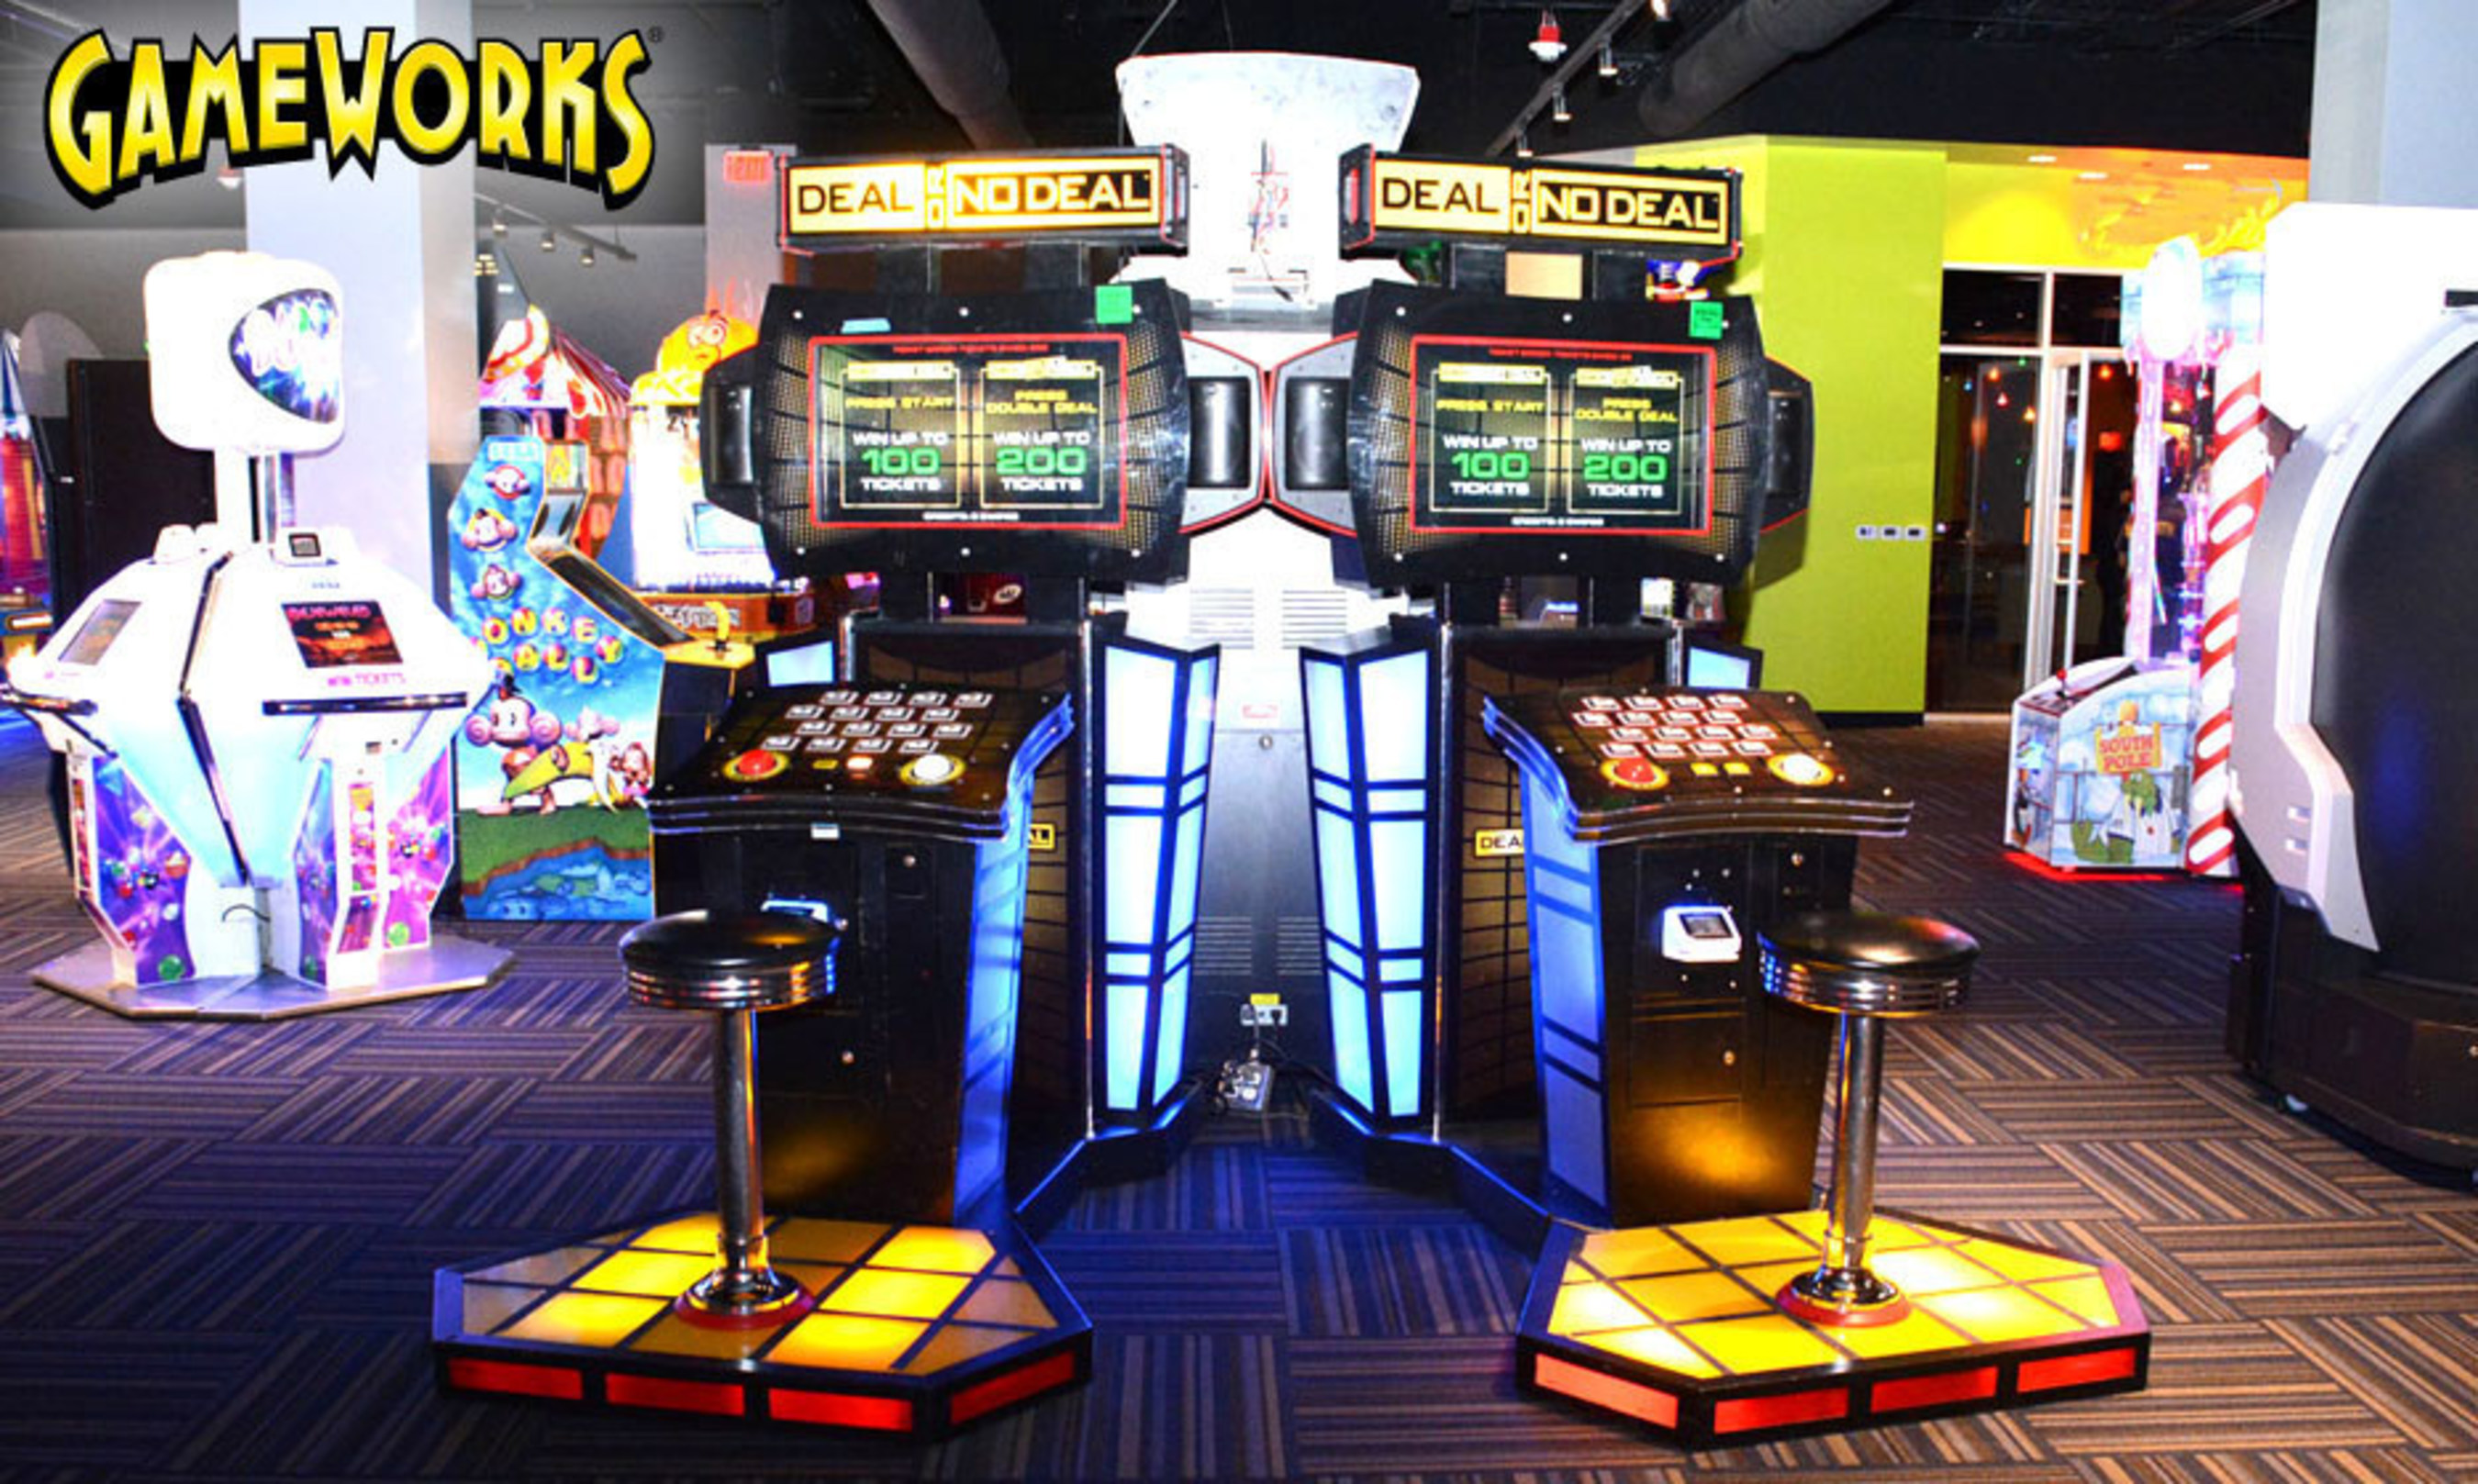 GameWorks Video Arcade and Entertainment Center